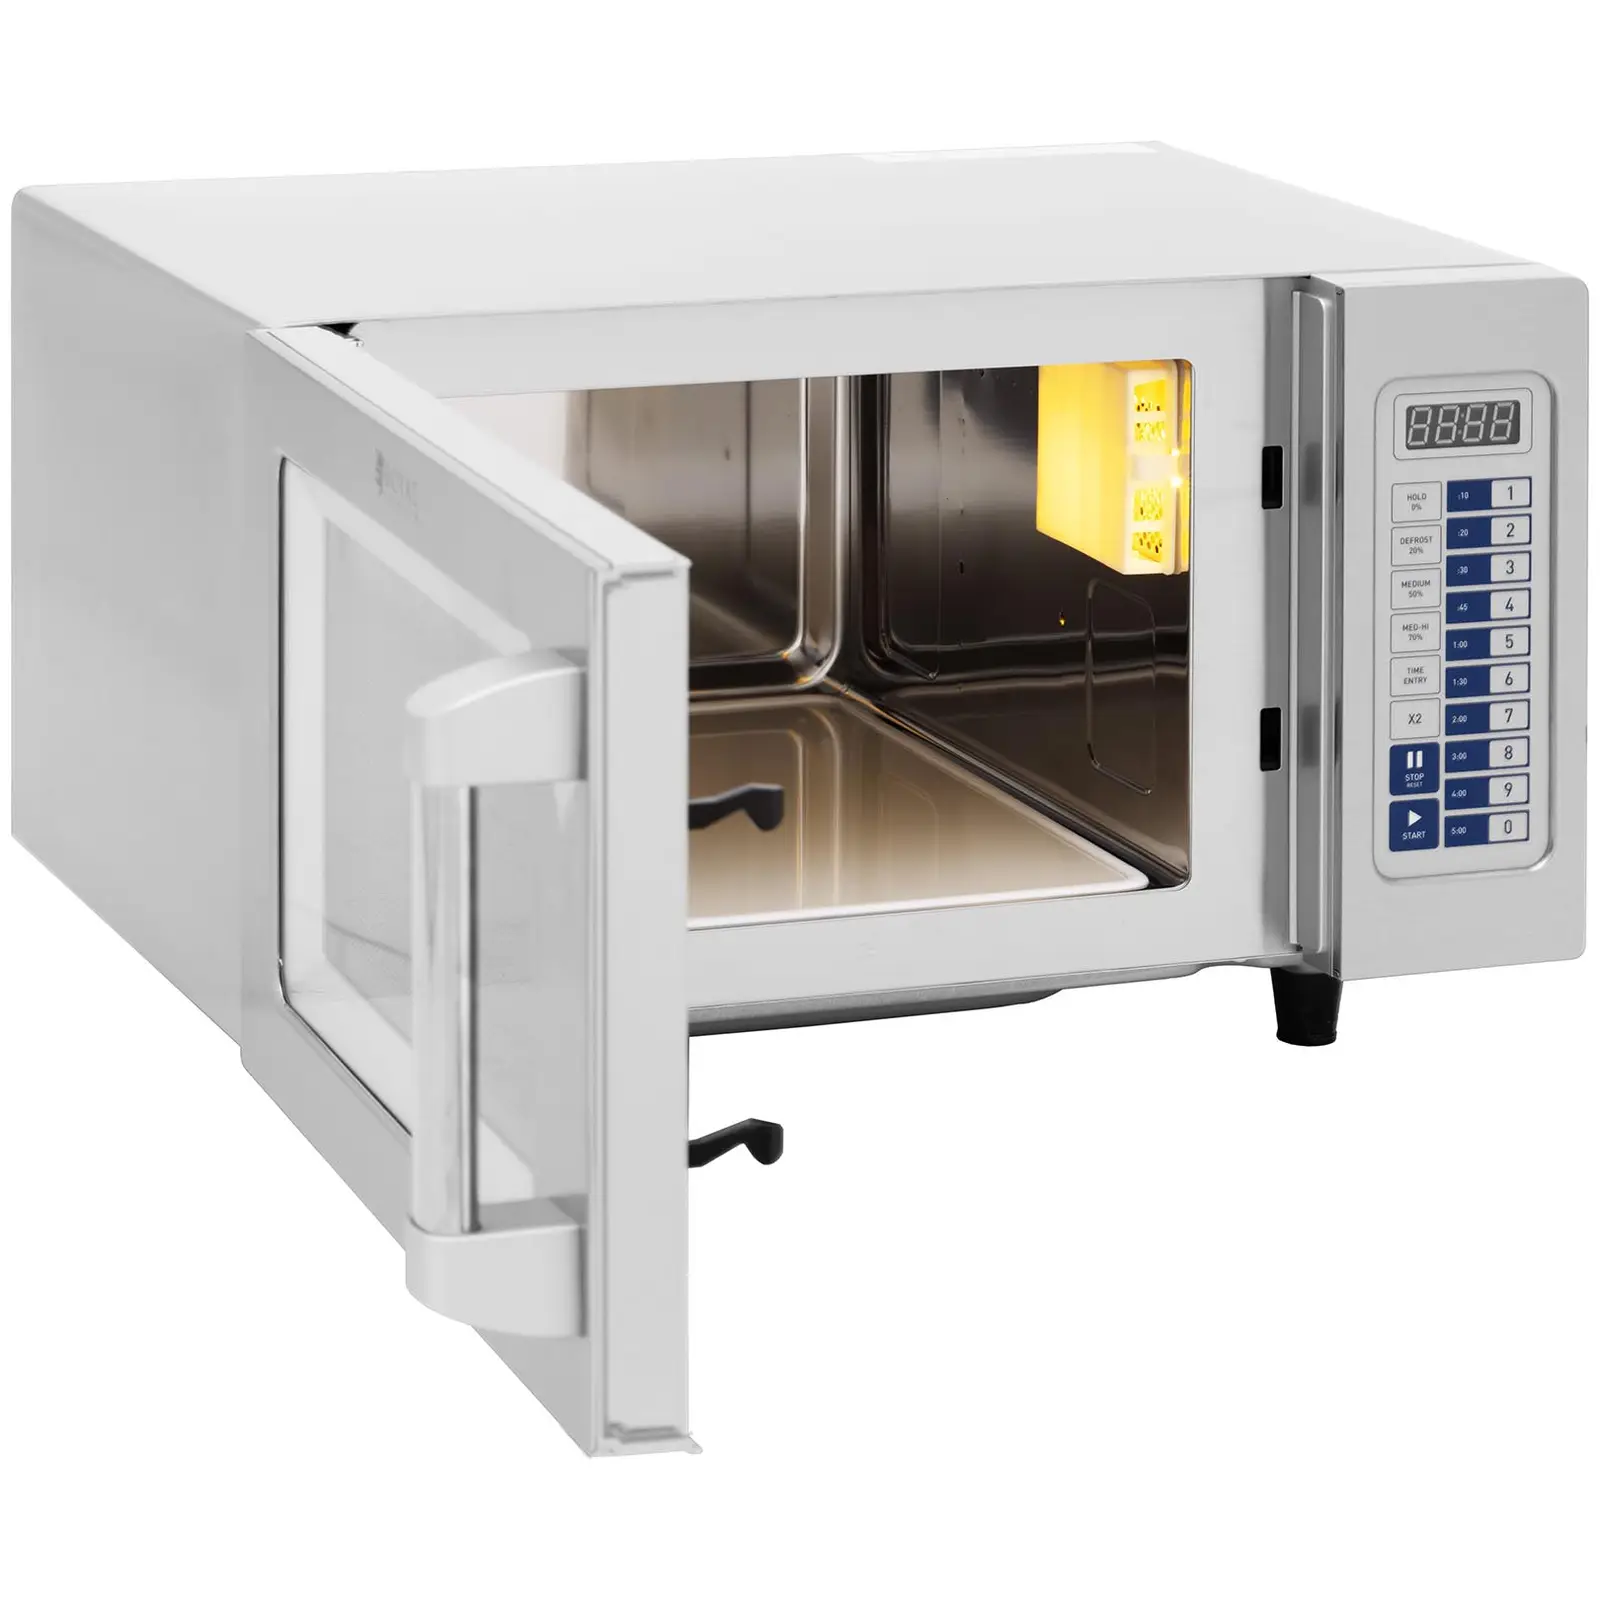 Forno microondas - catering - 1550 W - 25 l - Royal Catering